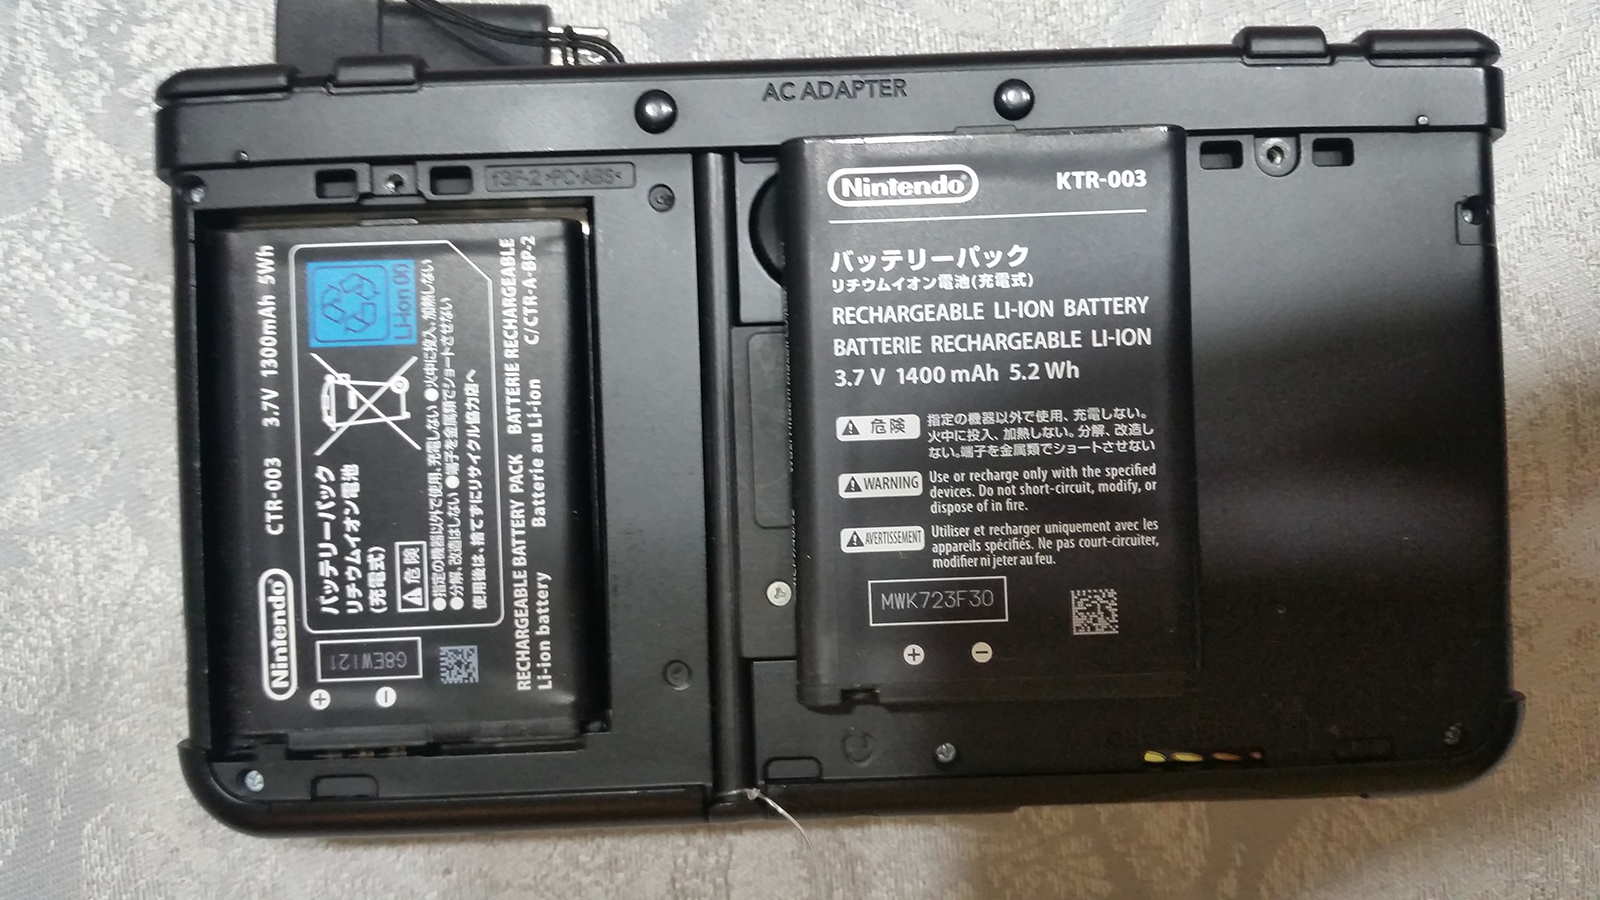 New Nintendo 3DS XL battery capacity differences | GBAtemp.net - The